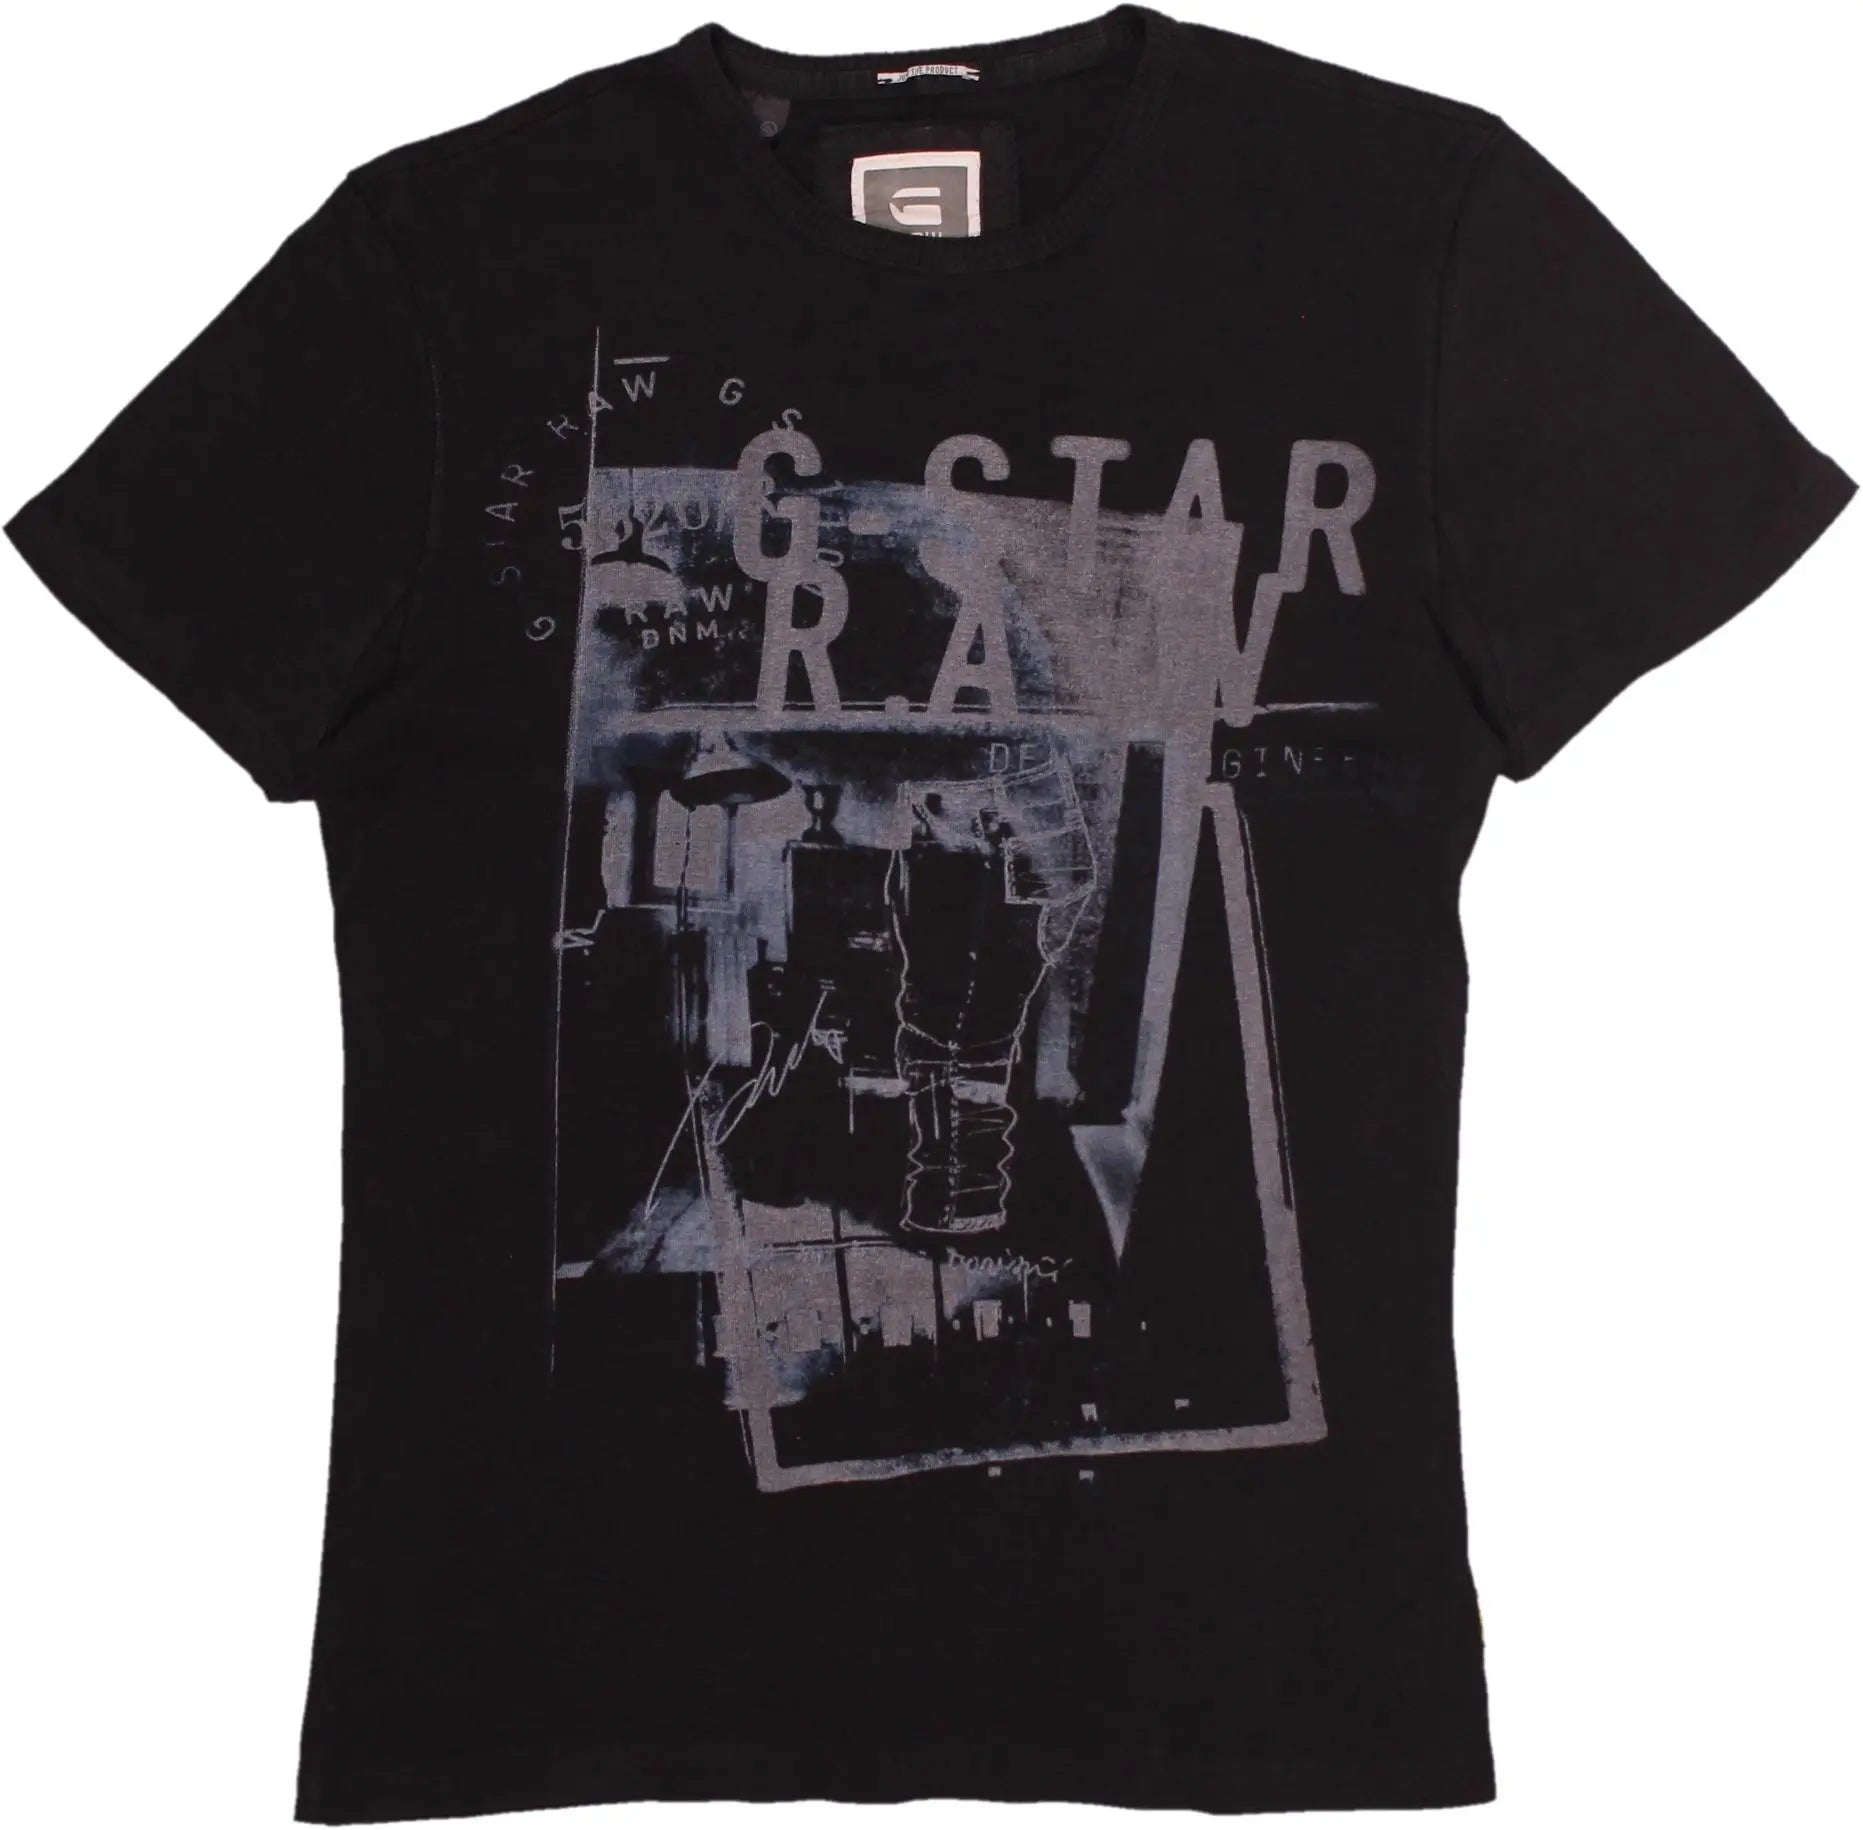 G-Star RAW - G-Star T-shirt- ThriftTale.com - Vintage and second handclothing